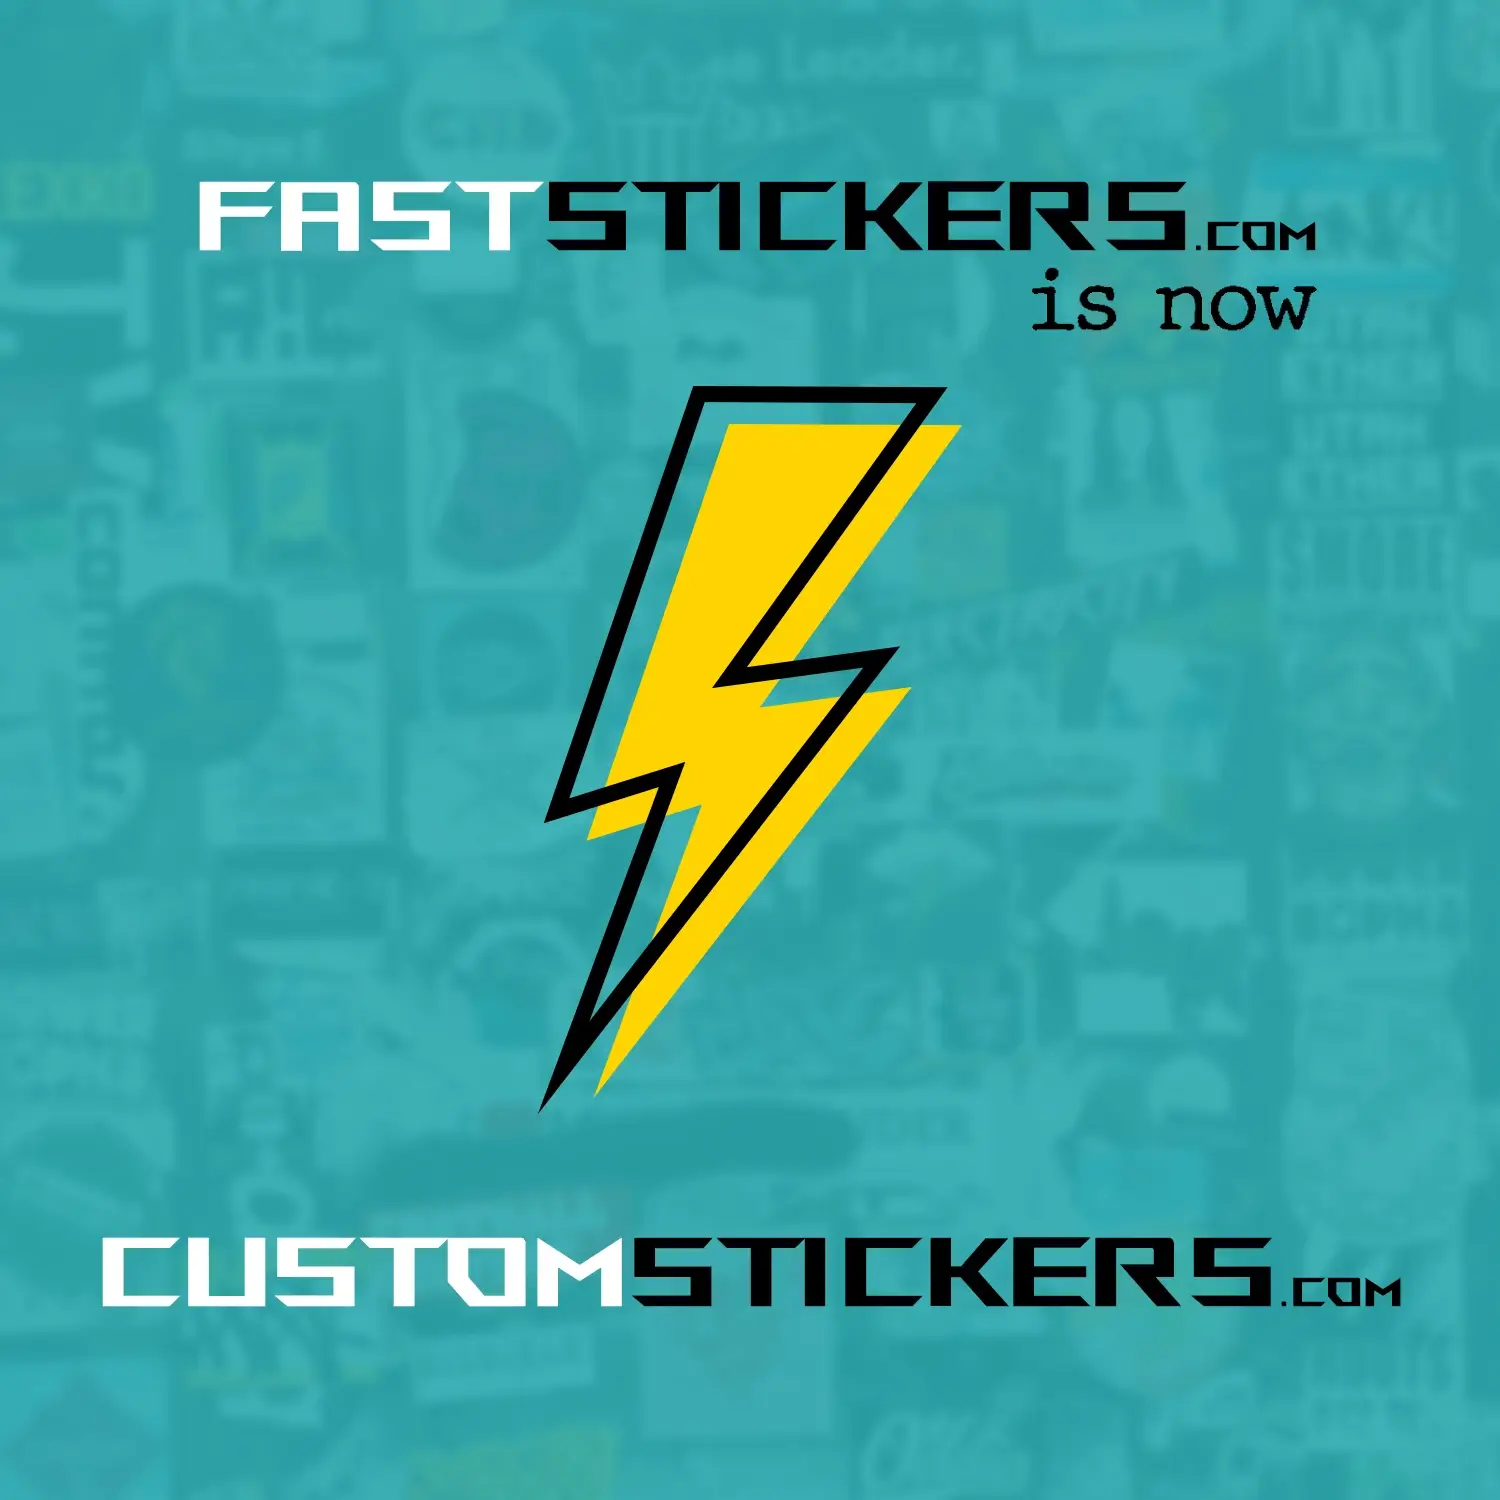 best sticker company domain name